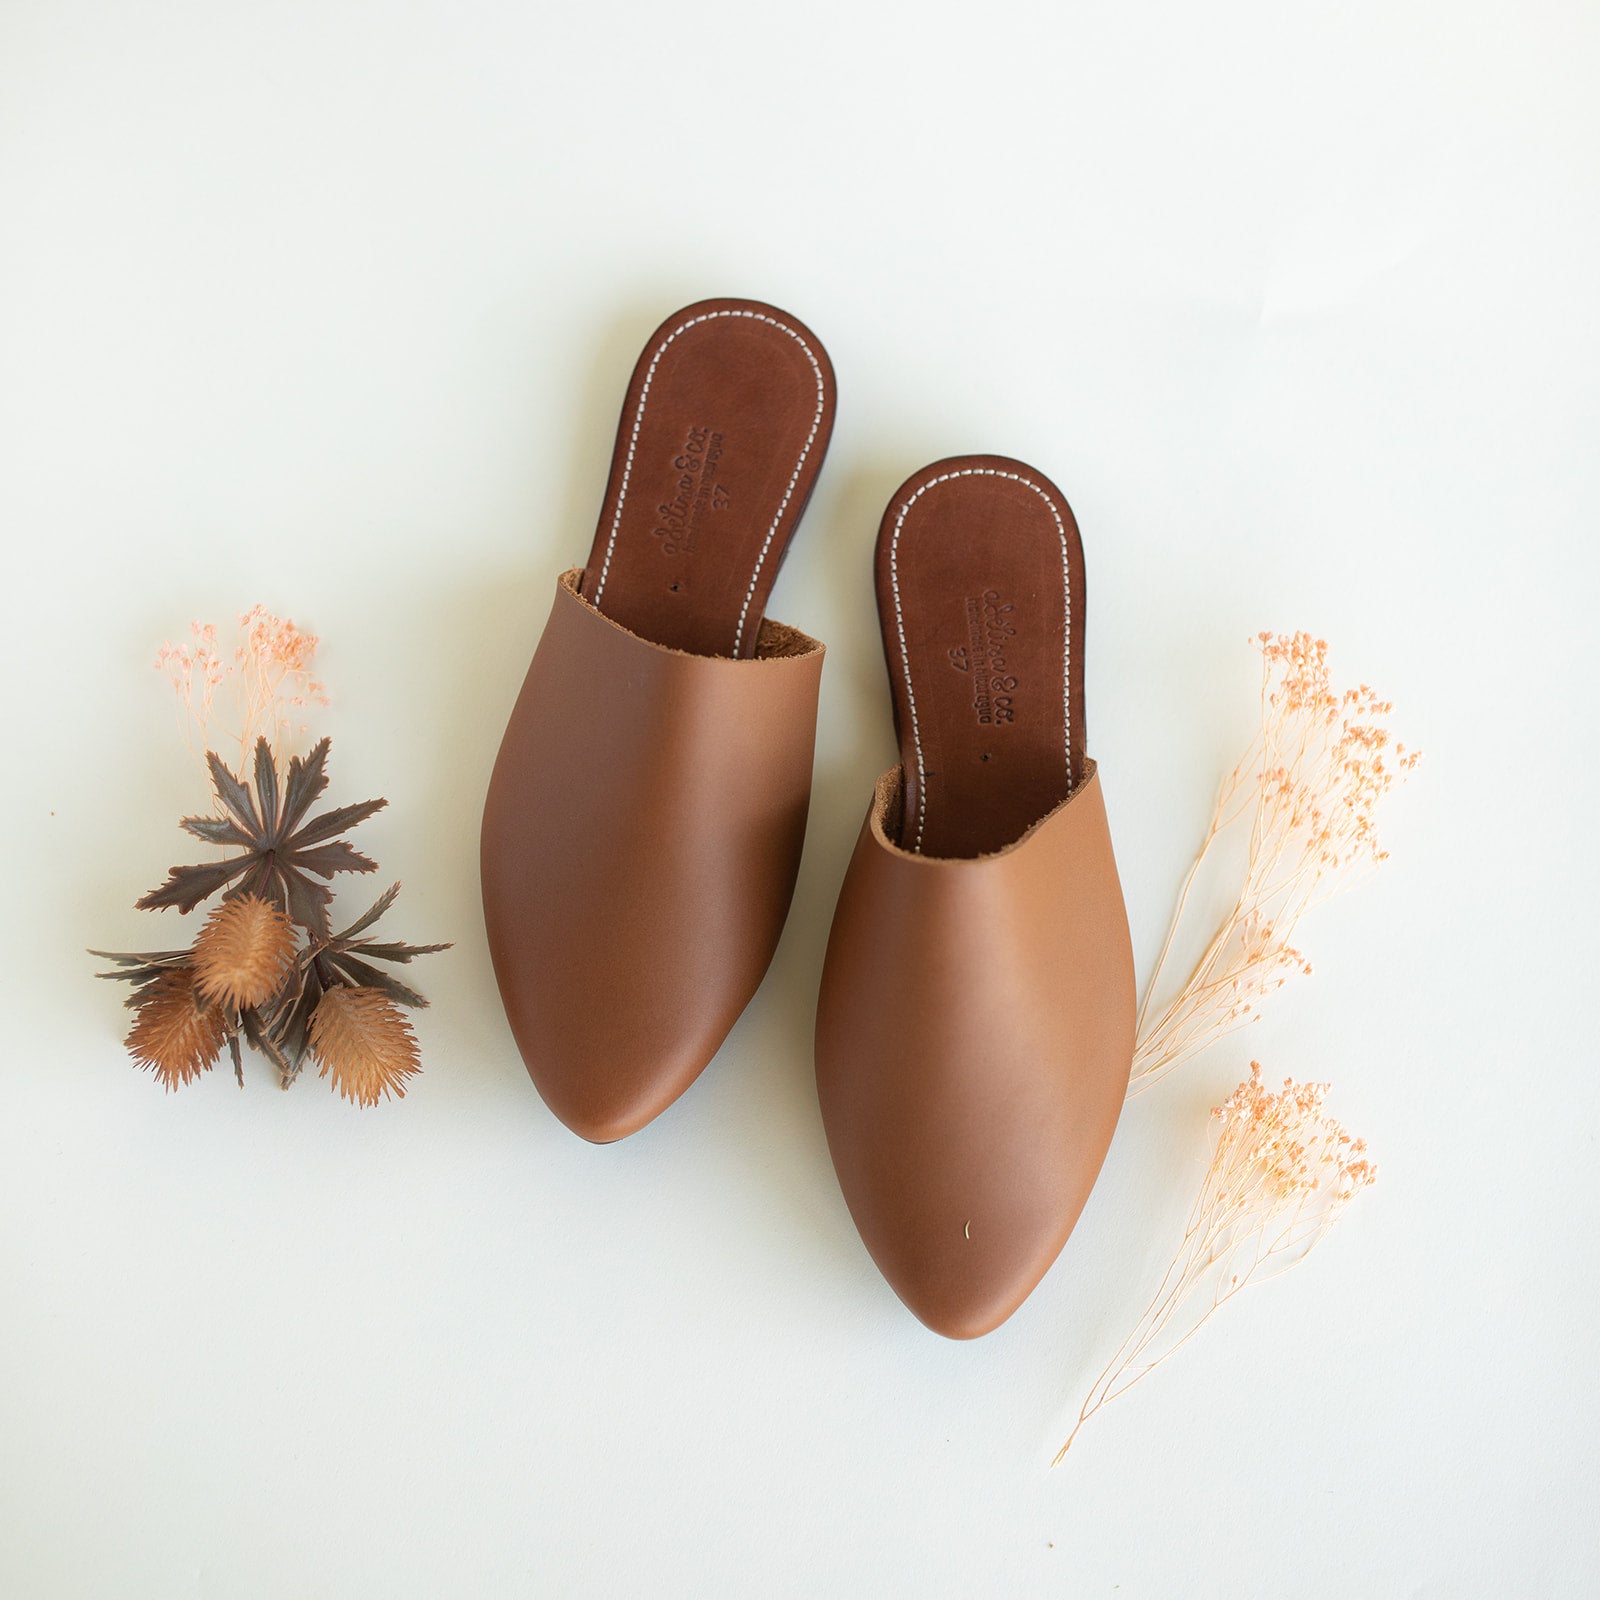 brown dress shoes for women